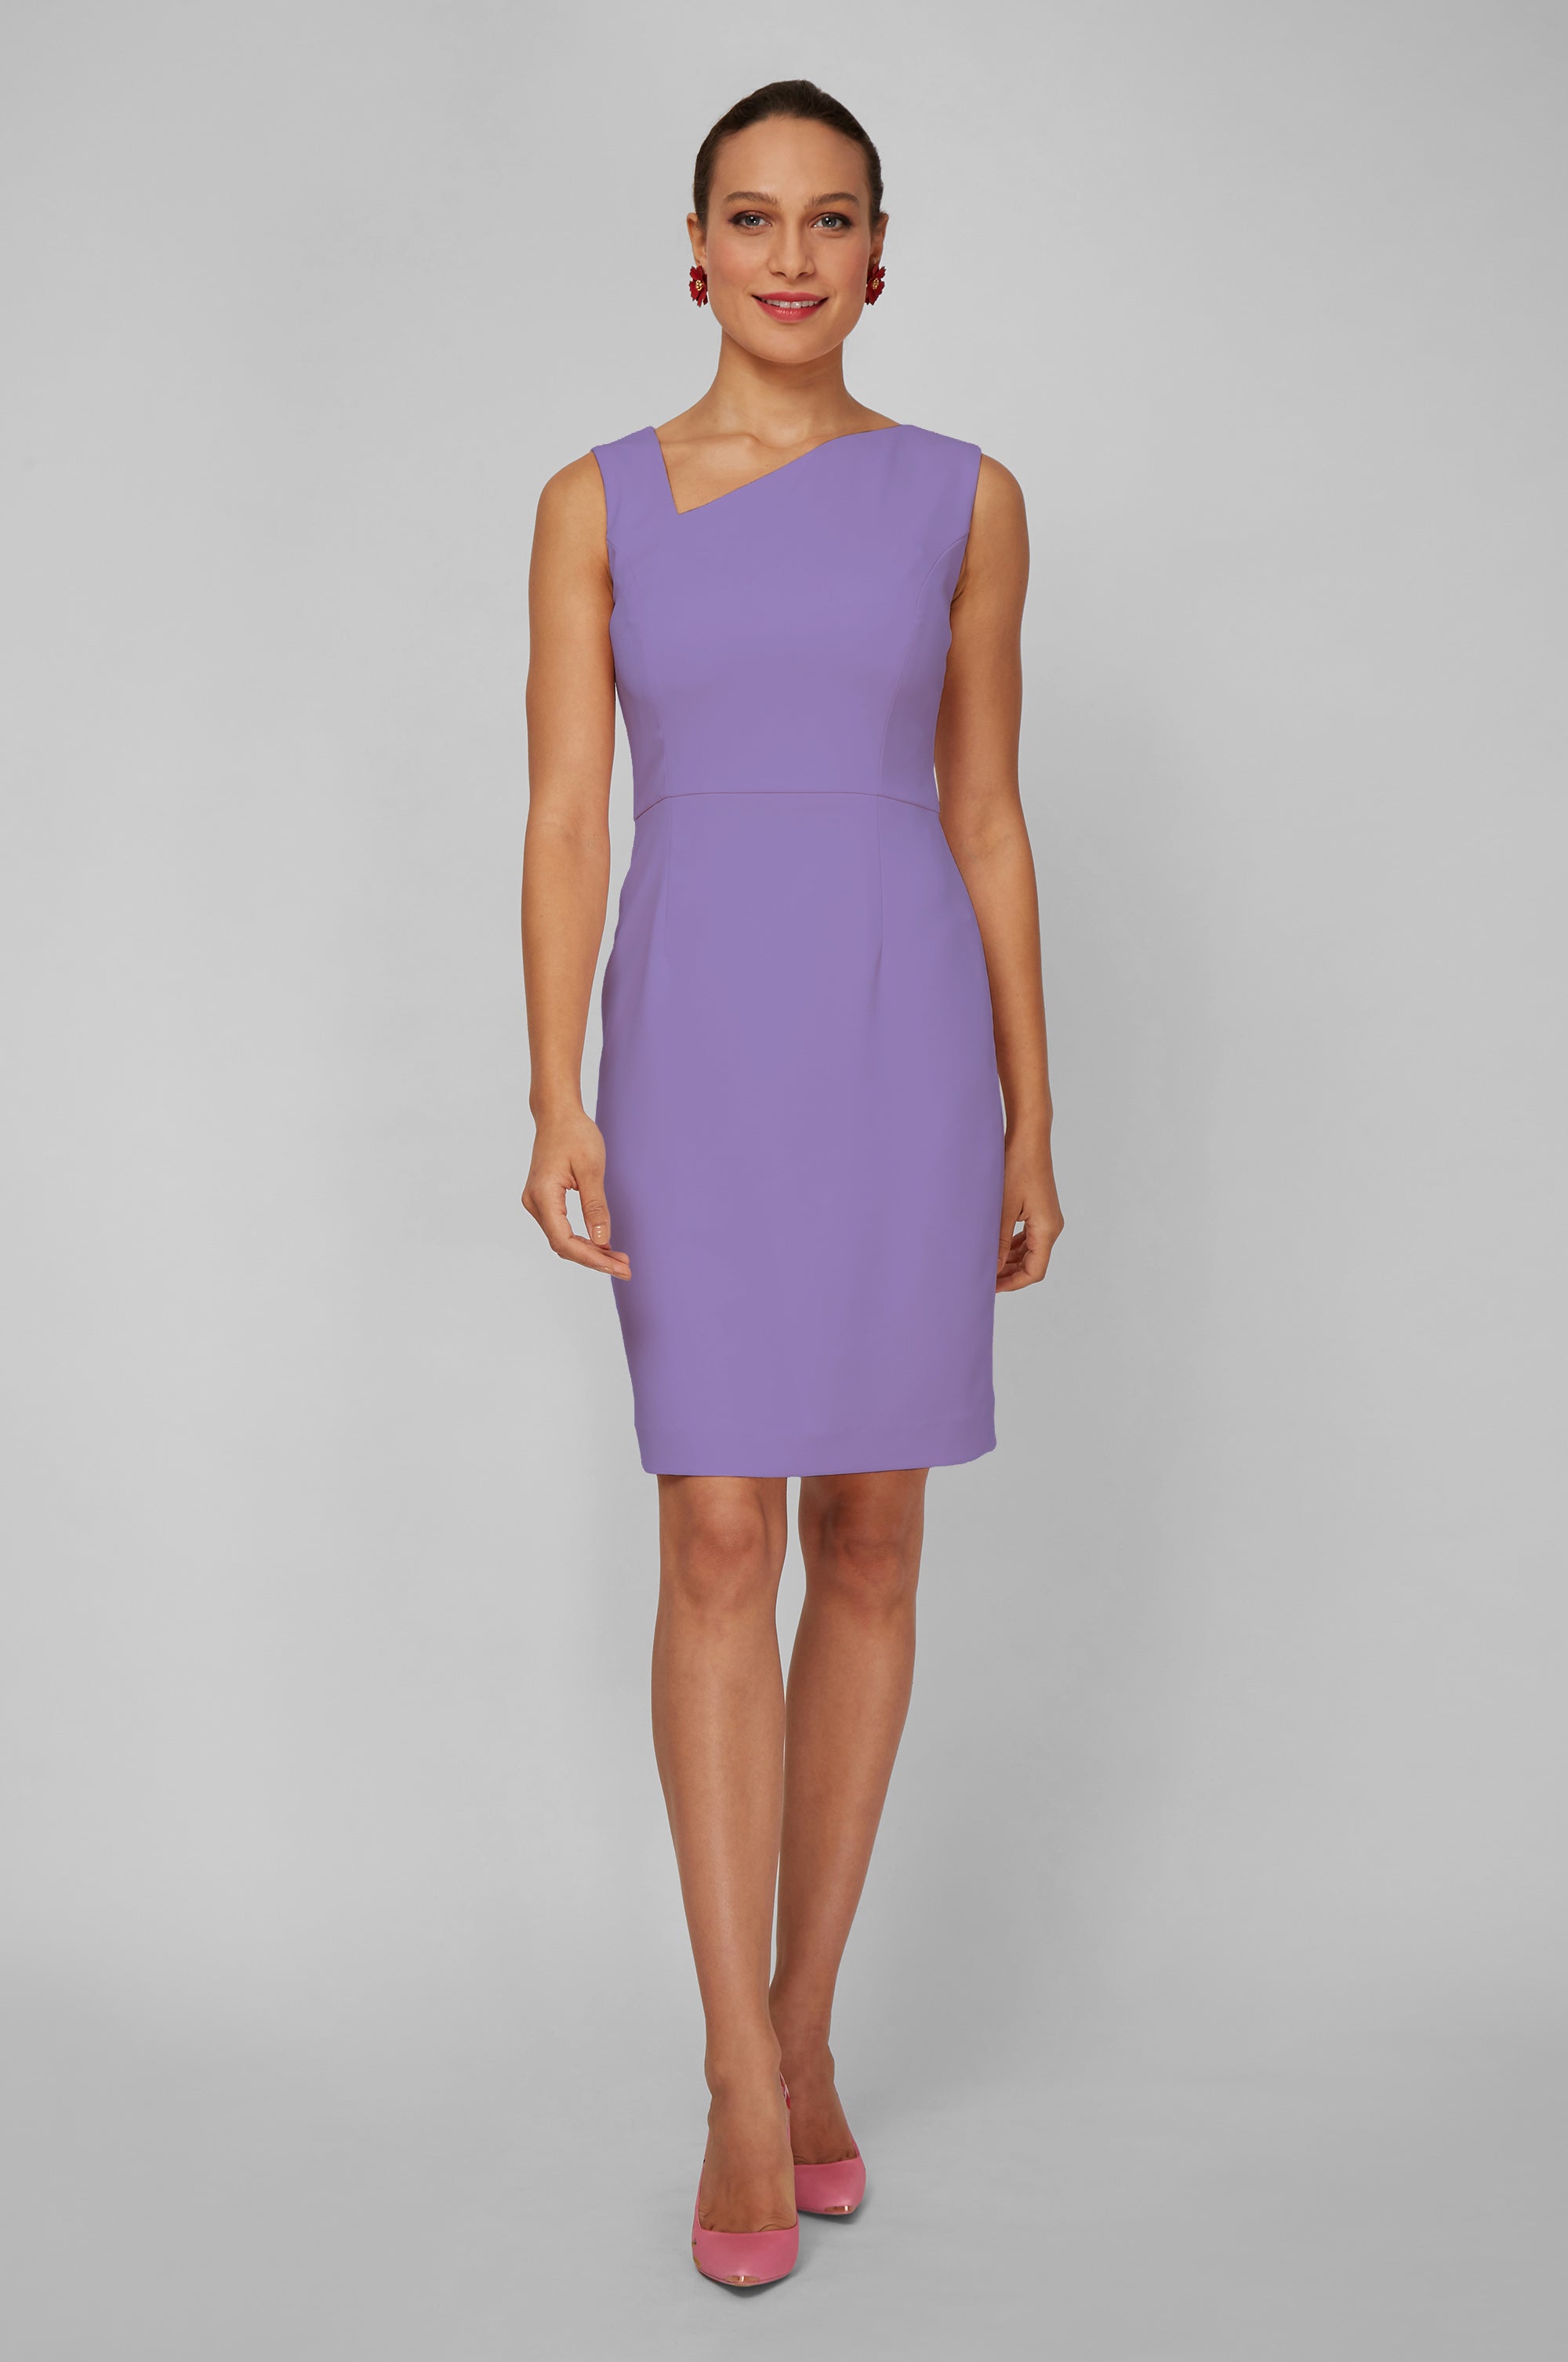 Women' Business Clea Dress - Thistle NORA GARDNER | OFFICIAL STORE for work and office